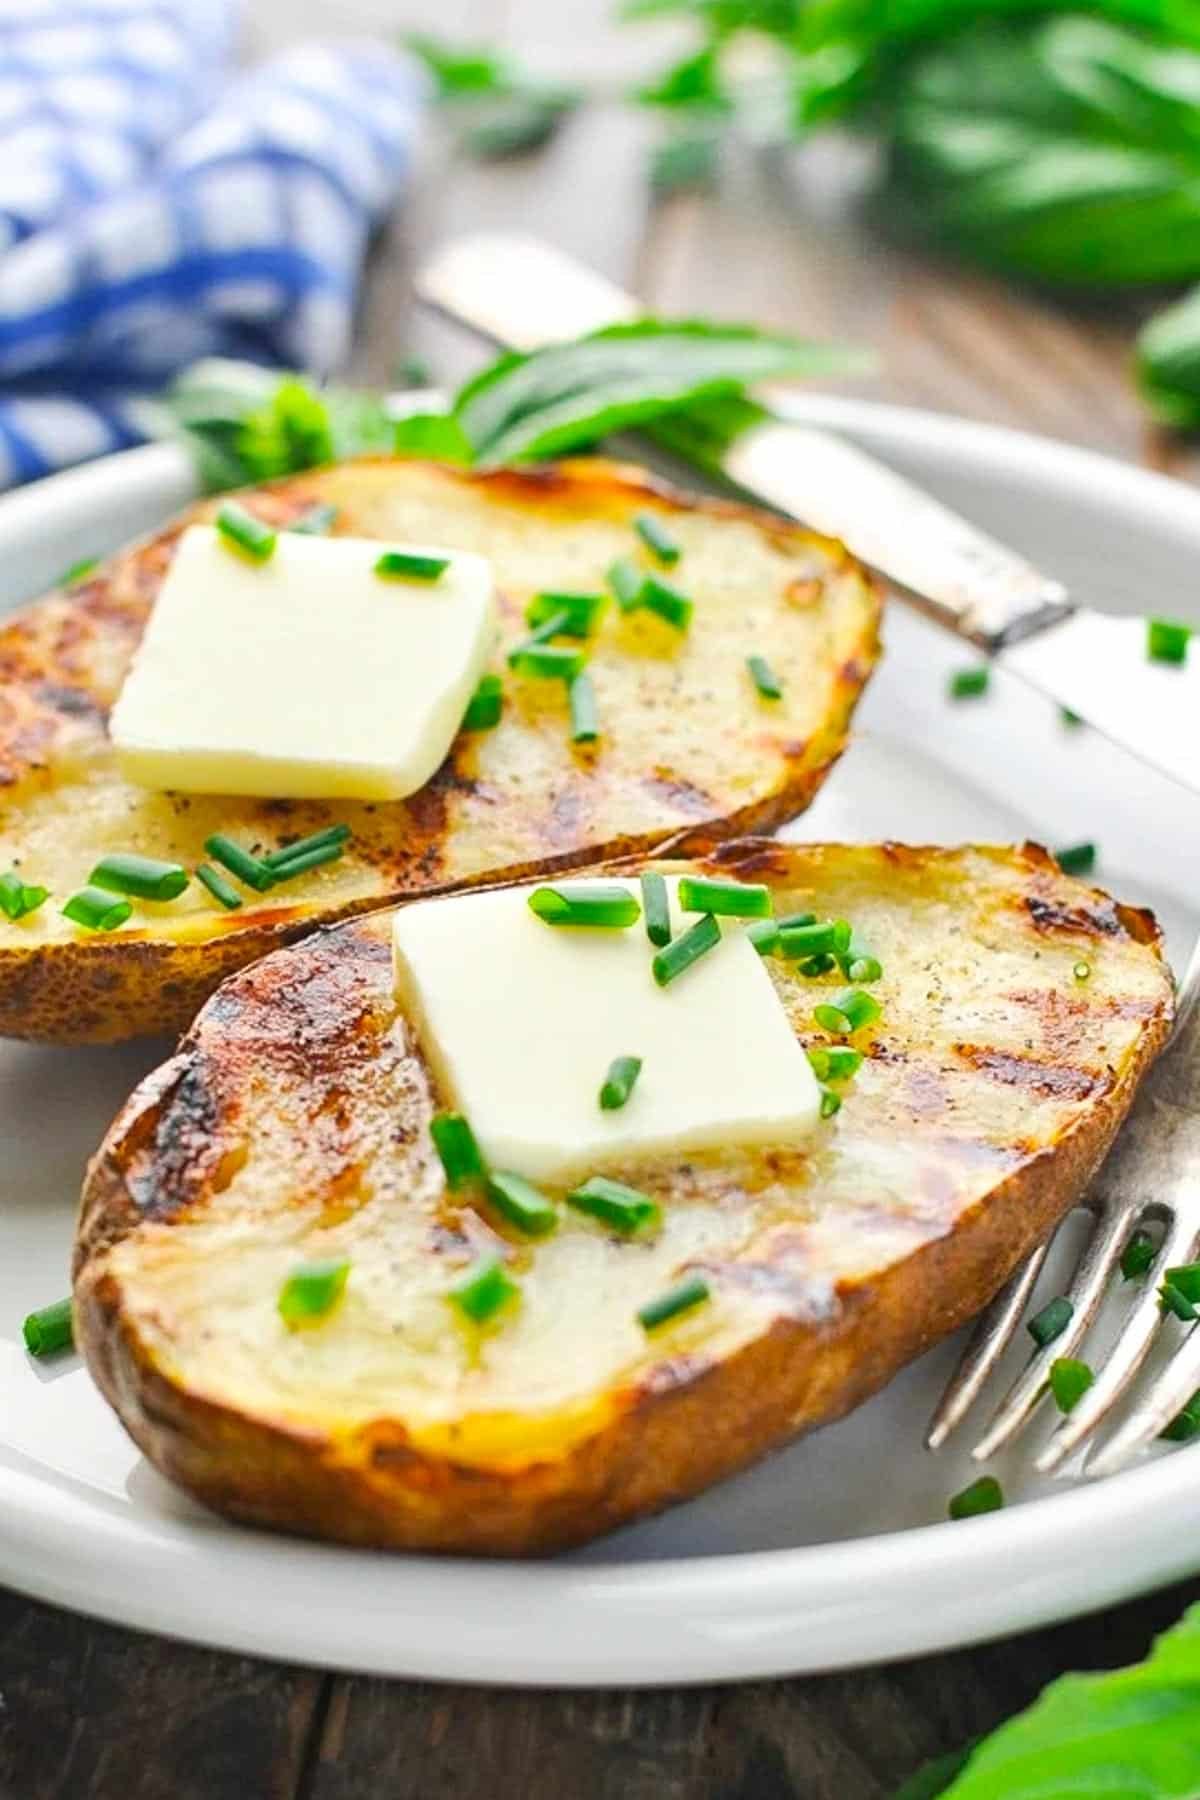 Grilled potatoes on a white plate for a collection of potato side dishes.